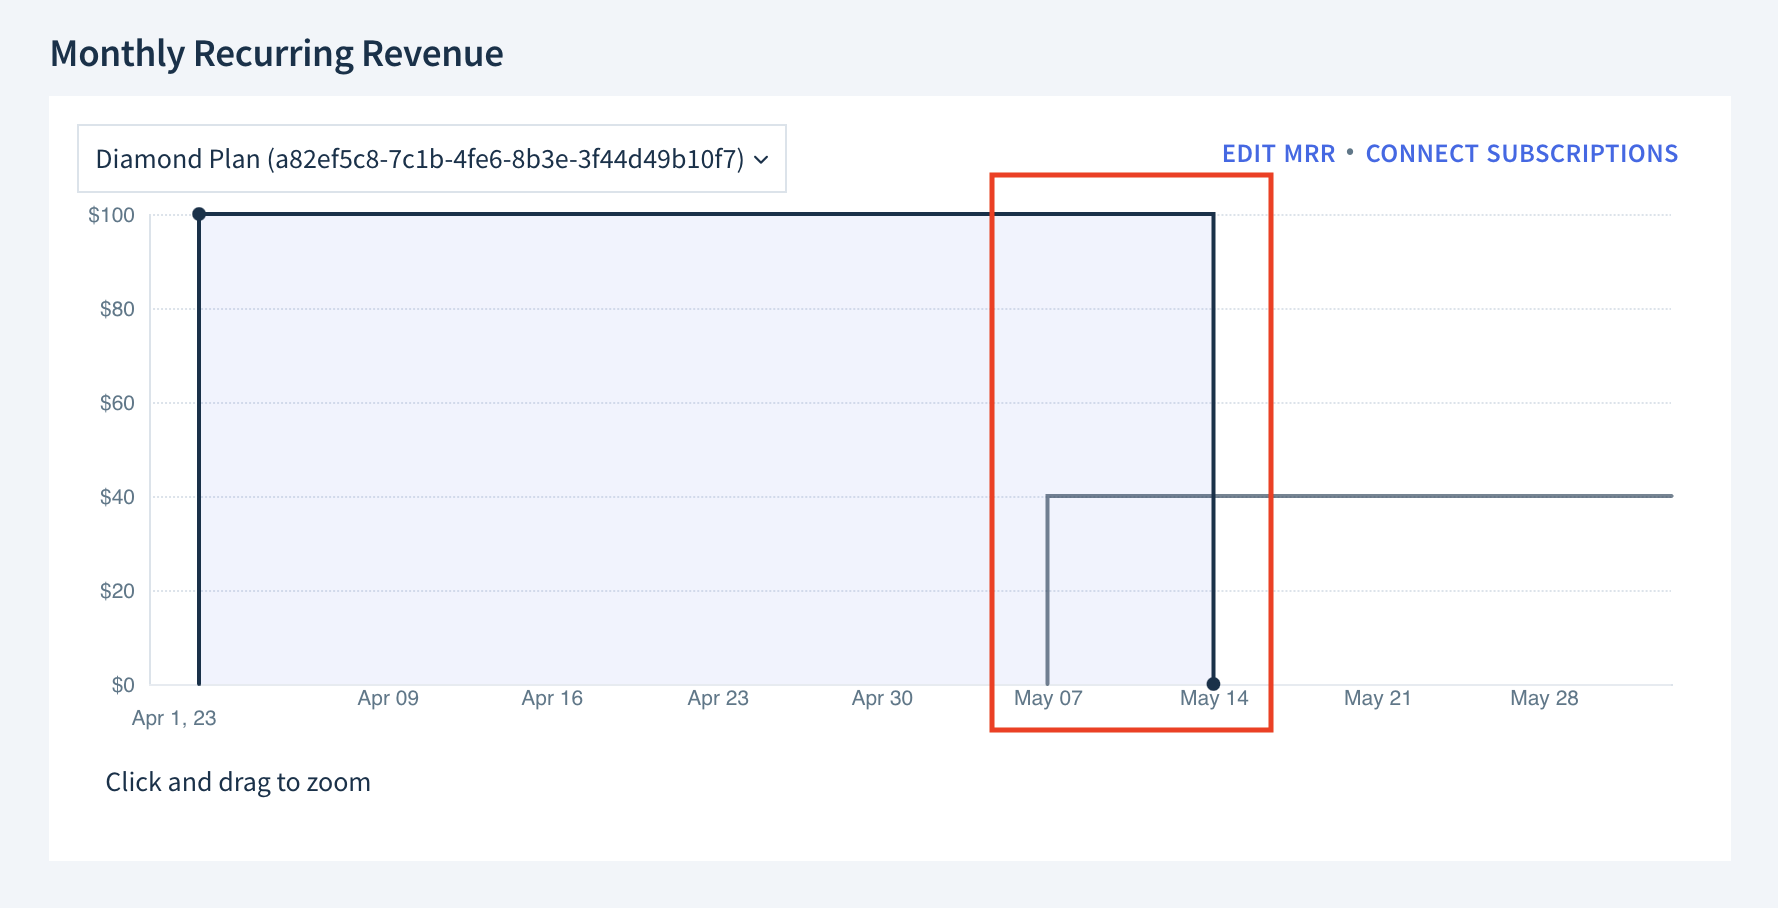 Screenshot of the Monthly Recurring Revenue graph showing two subscriptions. One subscription starts at the beginning of April and ends on May 14th. This subscription has an MRR of 100 dollars throughout its course. The service periods of both subscriptions overlap. The second subscription starts on May 7th and is still active. It has an MRR of 40 dollars throughout its course.